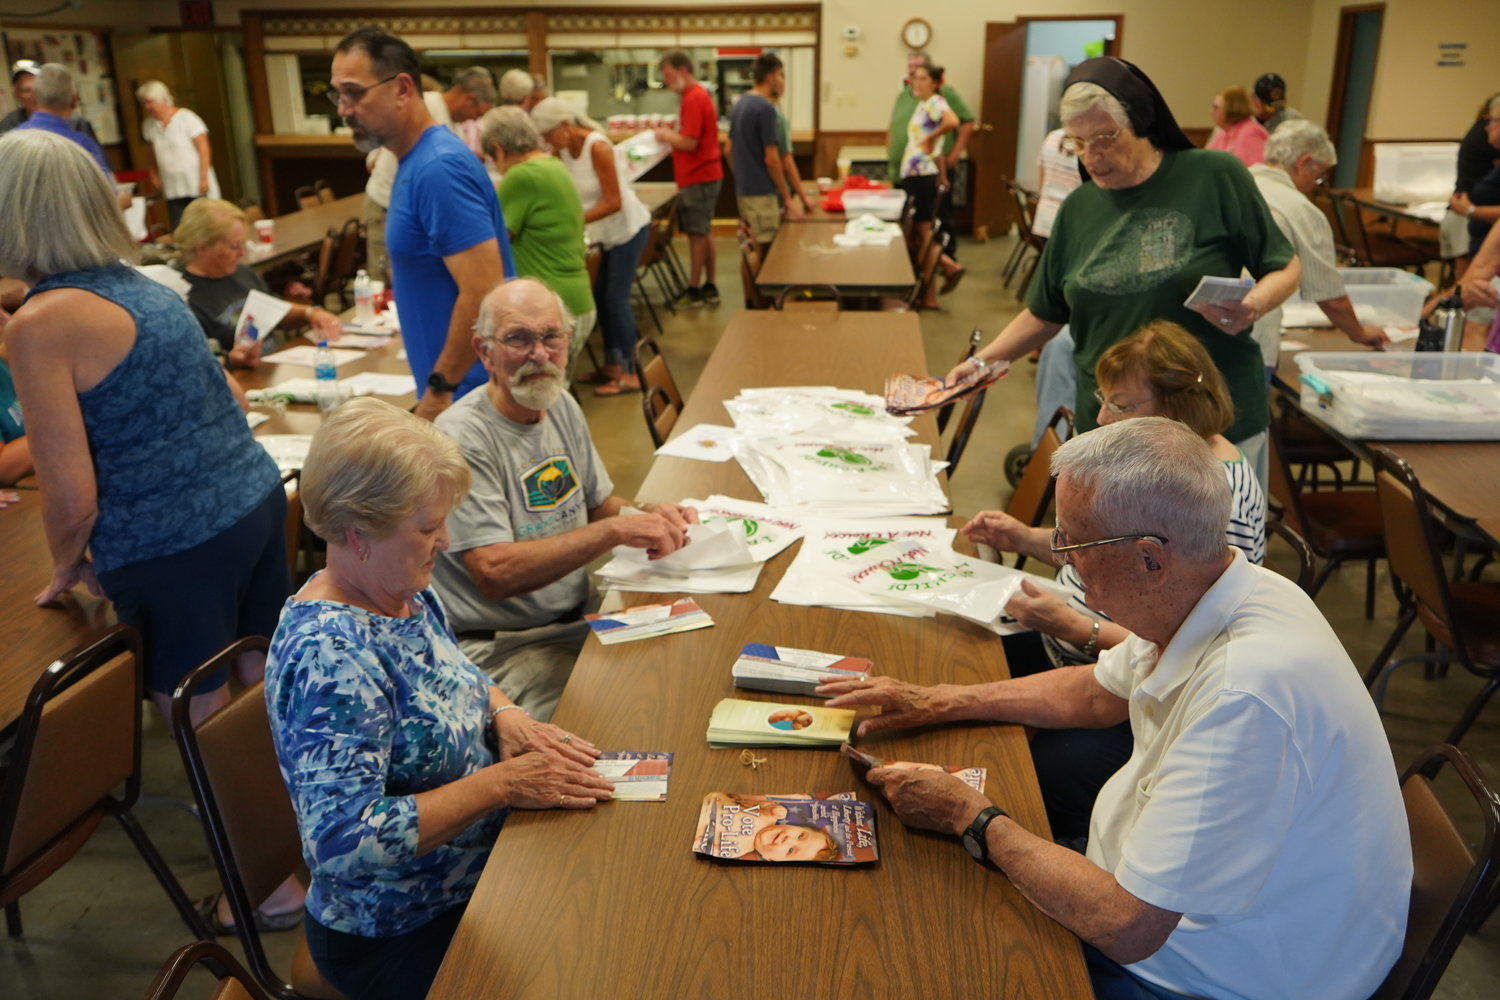 Volunteers gather in Knights of Columbus Council 831’s hall in Sedalia on Aug. 3, to fill 3,000 bags with informational materials for the 48th annual Right to Life booth at the Missouri State Fair in Sedalia.